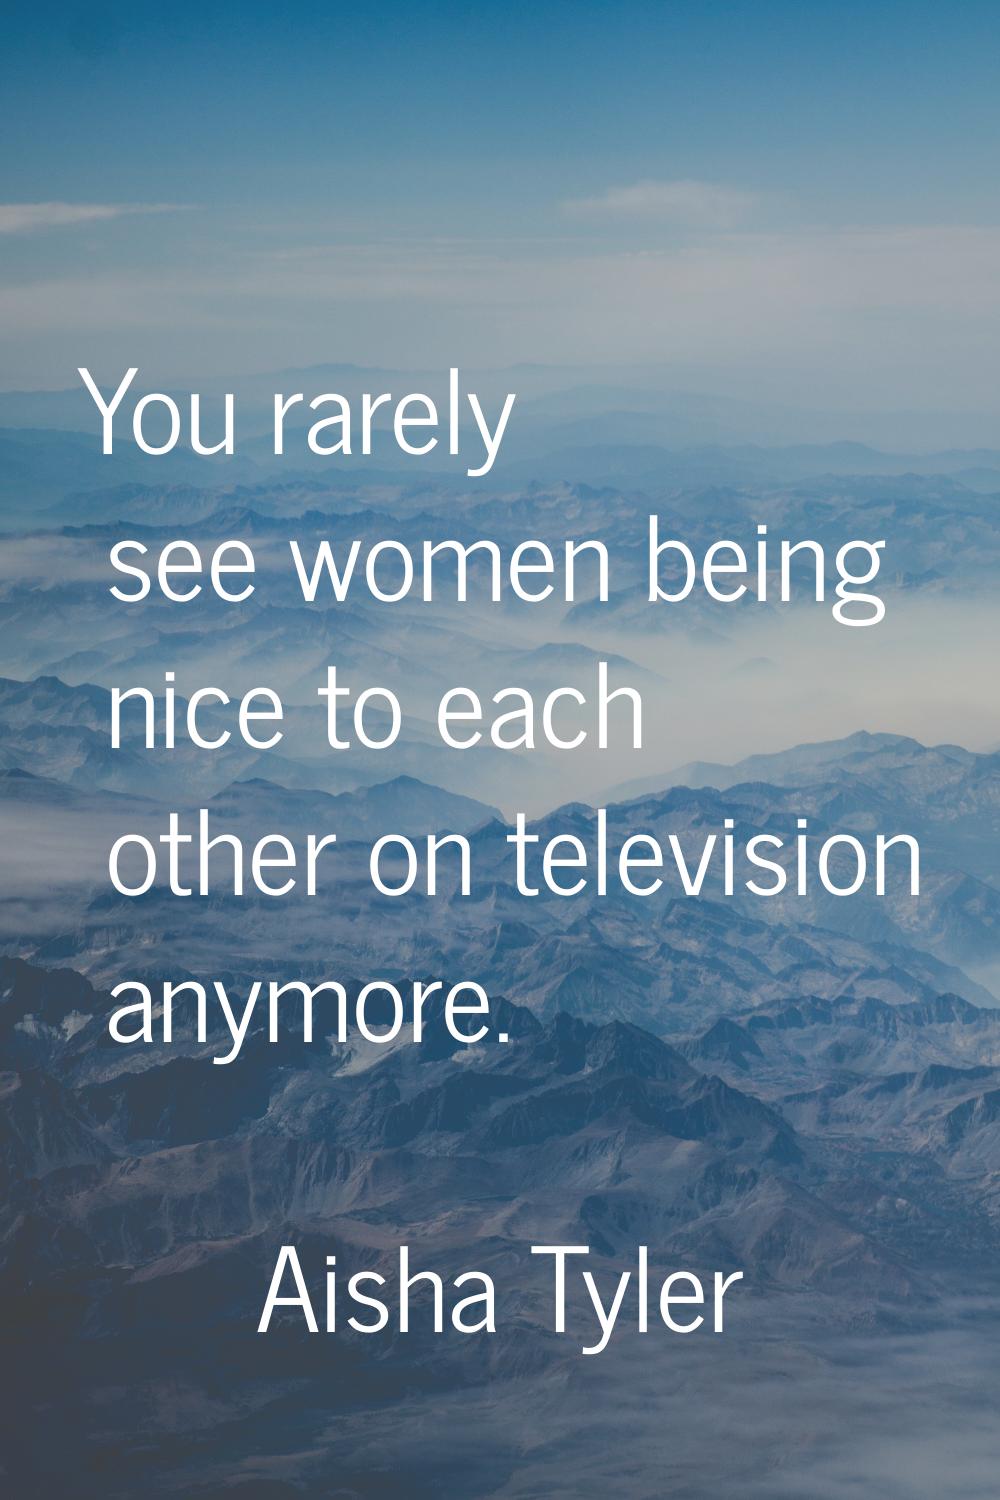 You rarely see women being nice to each other on television anymore.